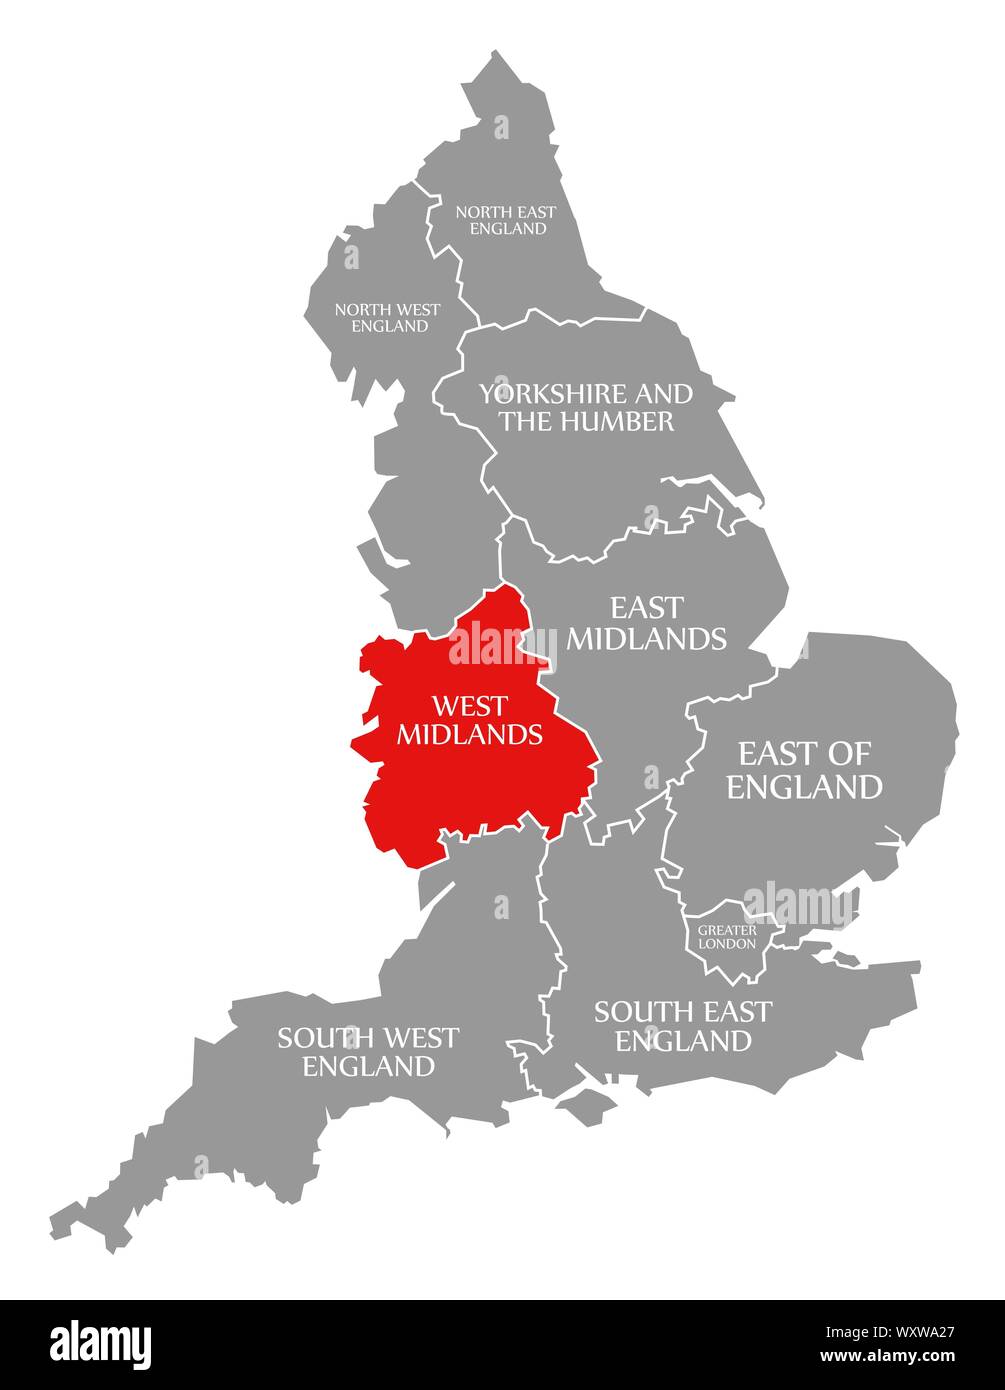 West Midlands red highlighted in map of England UK Stock Photo